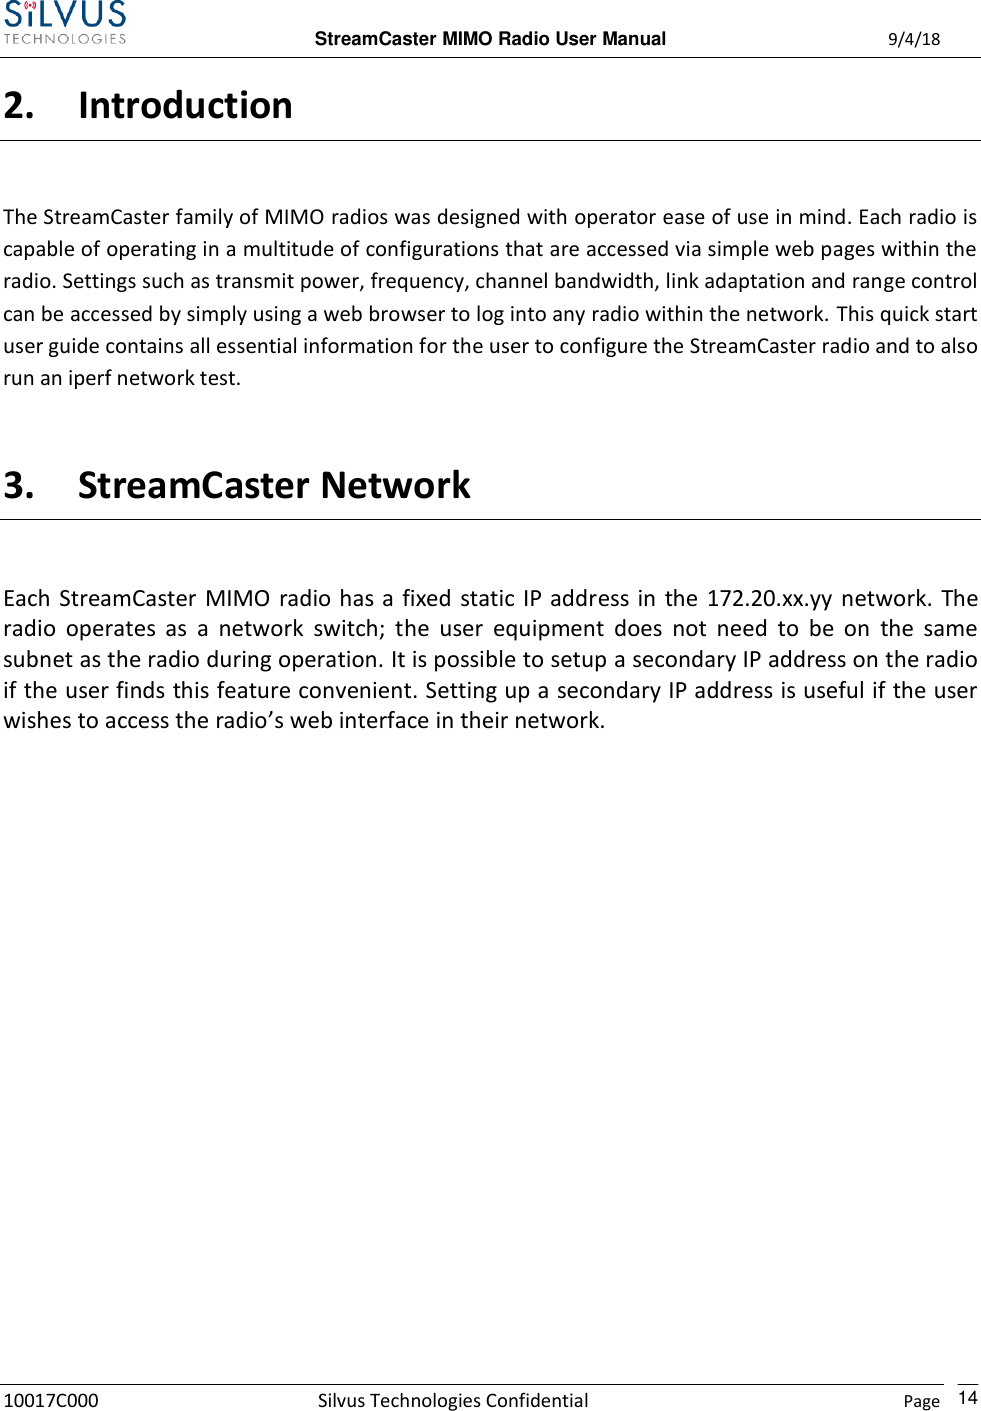  StreamCaster MIMO Radio User Manual  9/4/18 10017C000 Silvus Technologies Confidential    Page    14 2. Introduction The StreamCaster family of MIMO radios was designed with operator ease of use in mind. Each radio is capable of operating in a multitude of configurations that are accessed via simple web pages within the radio. Settings such as transmit power, frequency, channel bandwidth, link adaptation and range control can be accessed by simply using a web browser to log into any radio within the network. This quick start user guide contains all essential information for the user to configure the StreamCaster radio and to also run an iperf network test.  3. StreamCaster Network Each StreamCaster MIMO  radio has a  fixed static IP address in  the 172.20.xx.yy  network.  The radio  operates  as  a  network  switch;  the  user  equipment  does  not  need  to  be  on  the  same subnet as the radio during operation. It is possible to setup a secondary IP address on the radio if the user finds this feature convenient. Setting up a secondary IP address is useful if the user wishes to access the radio’s web interface in their network.            